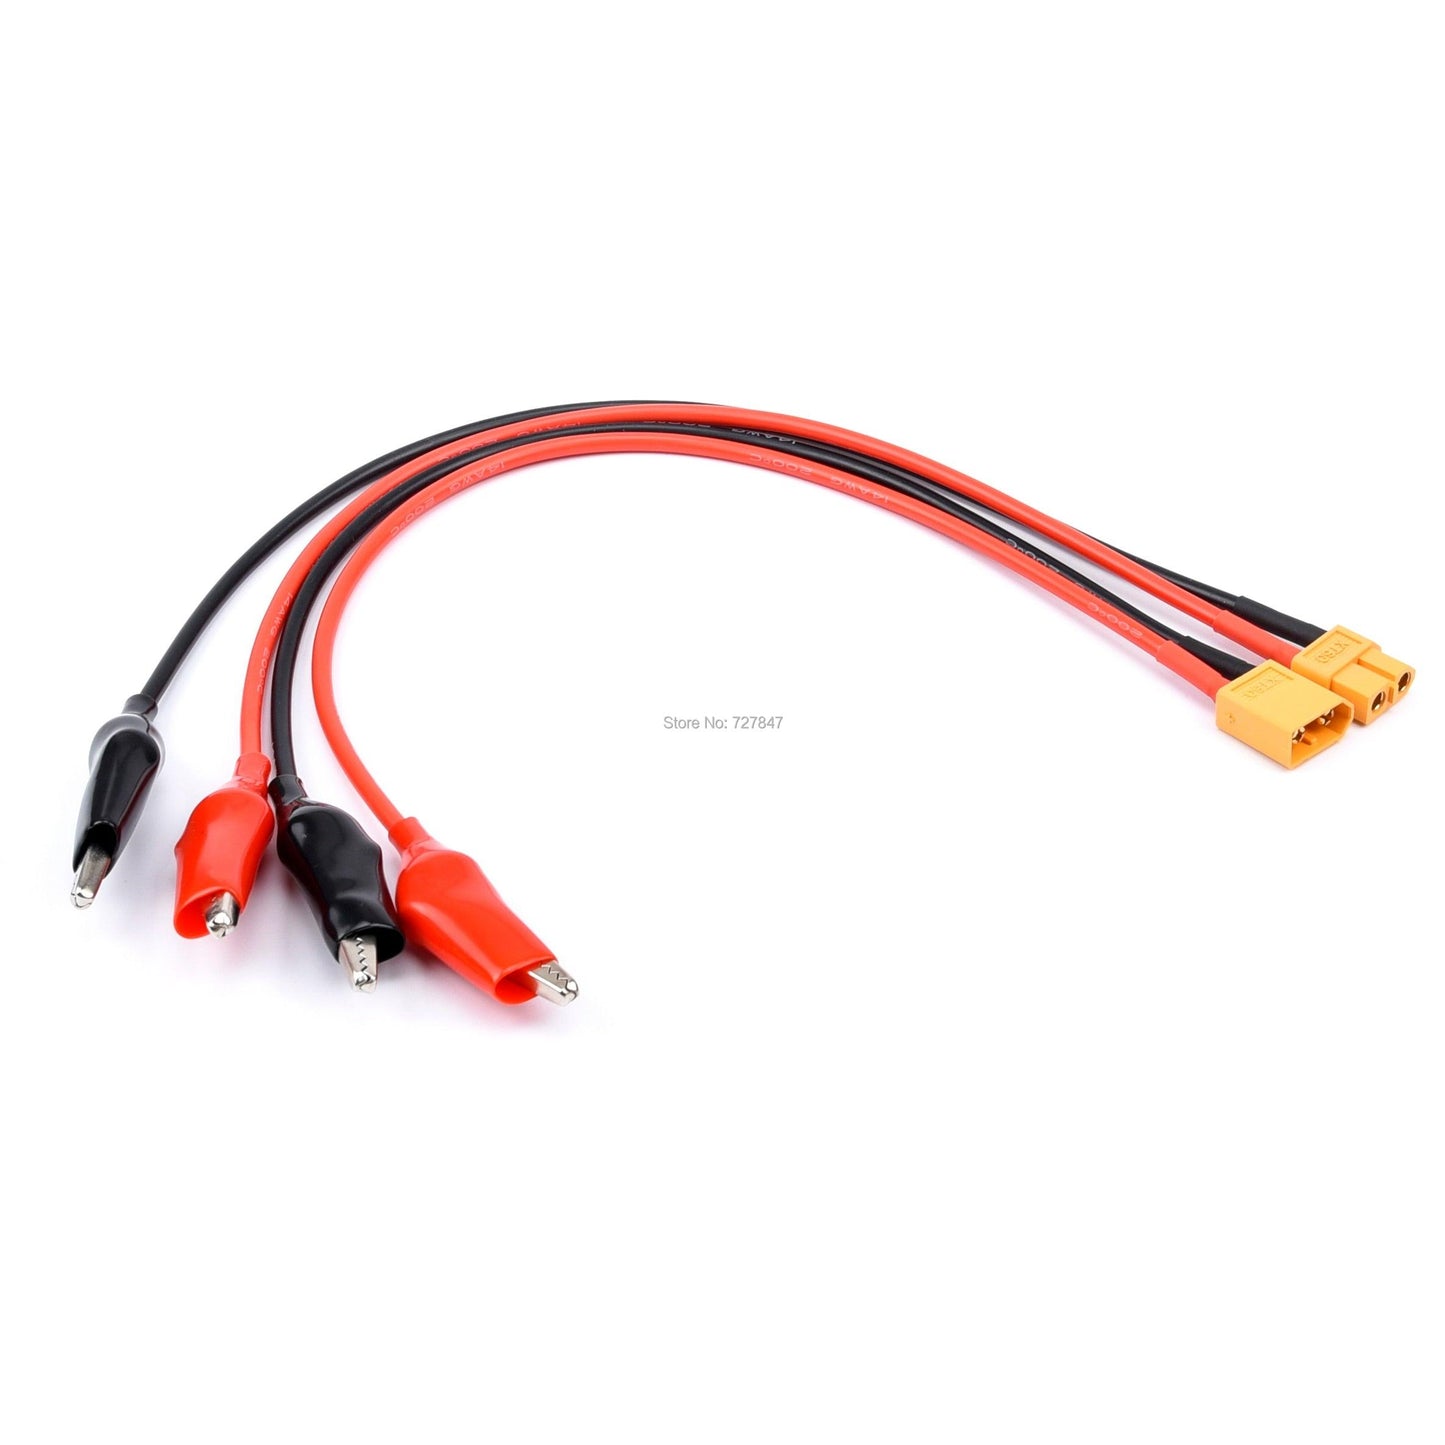 FPV Drone Charger Cable - Universal Charger Cable XT60 Male / Female to Crocodile Clip Conector Plug 14Awg Wire Cable - RCDrone